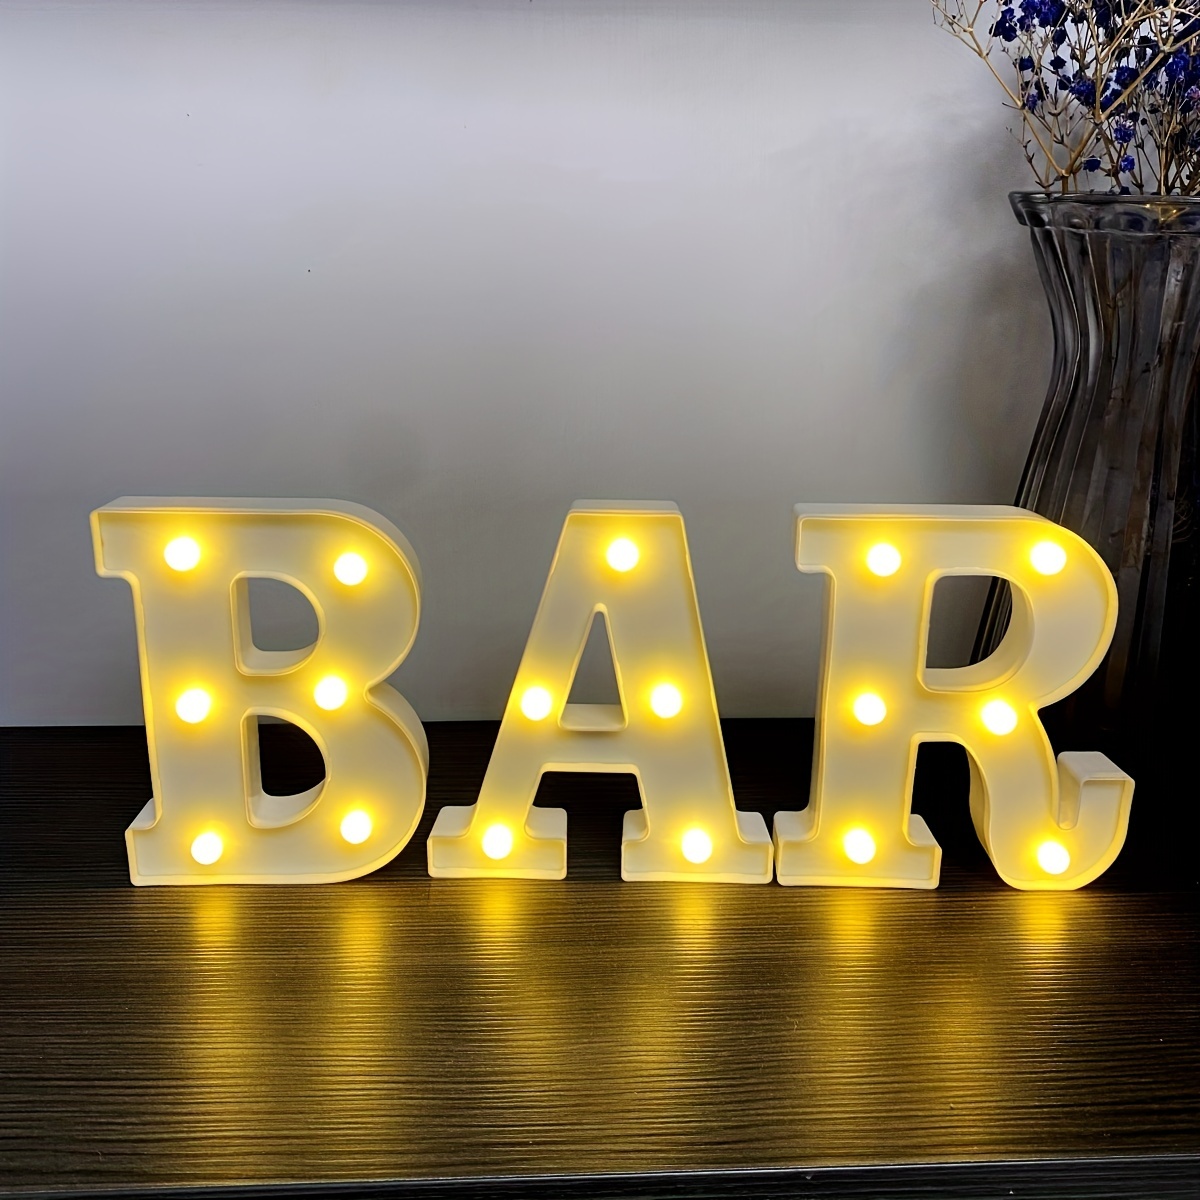 

1pc Led Bar Lighted Sign Bar Sign, Battery Operated Bar, 15.8x6.4x1.1in (40.3 X16.3x2.8cm), Large Letter Bar, Size About 20.7x8.6x1.49in (about 53.2x22x3.8cm), Decorative Light